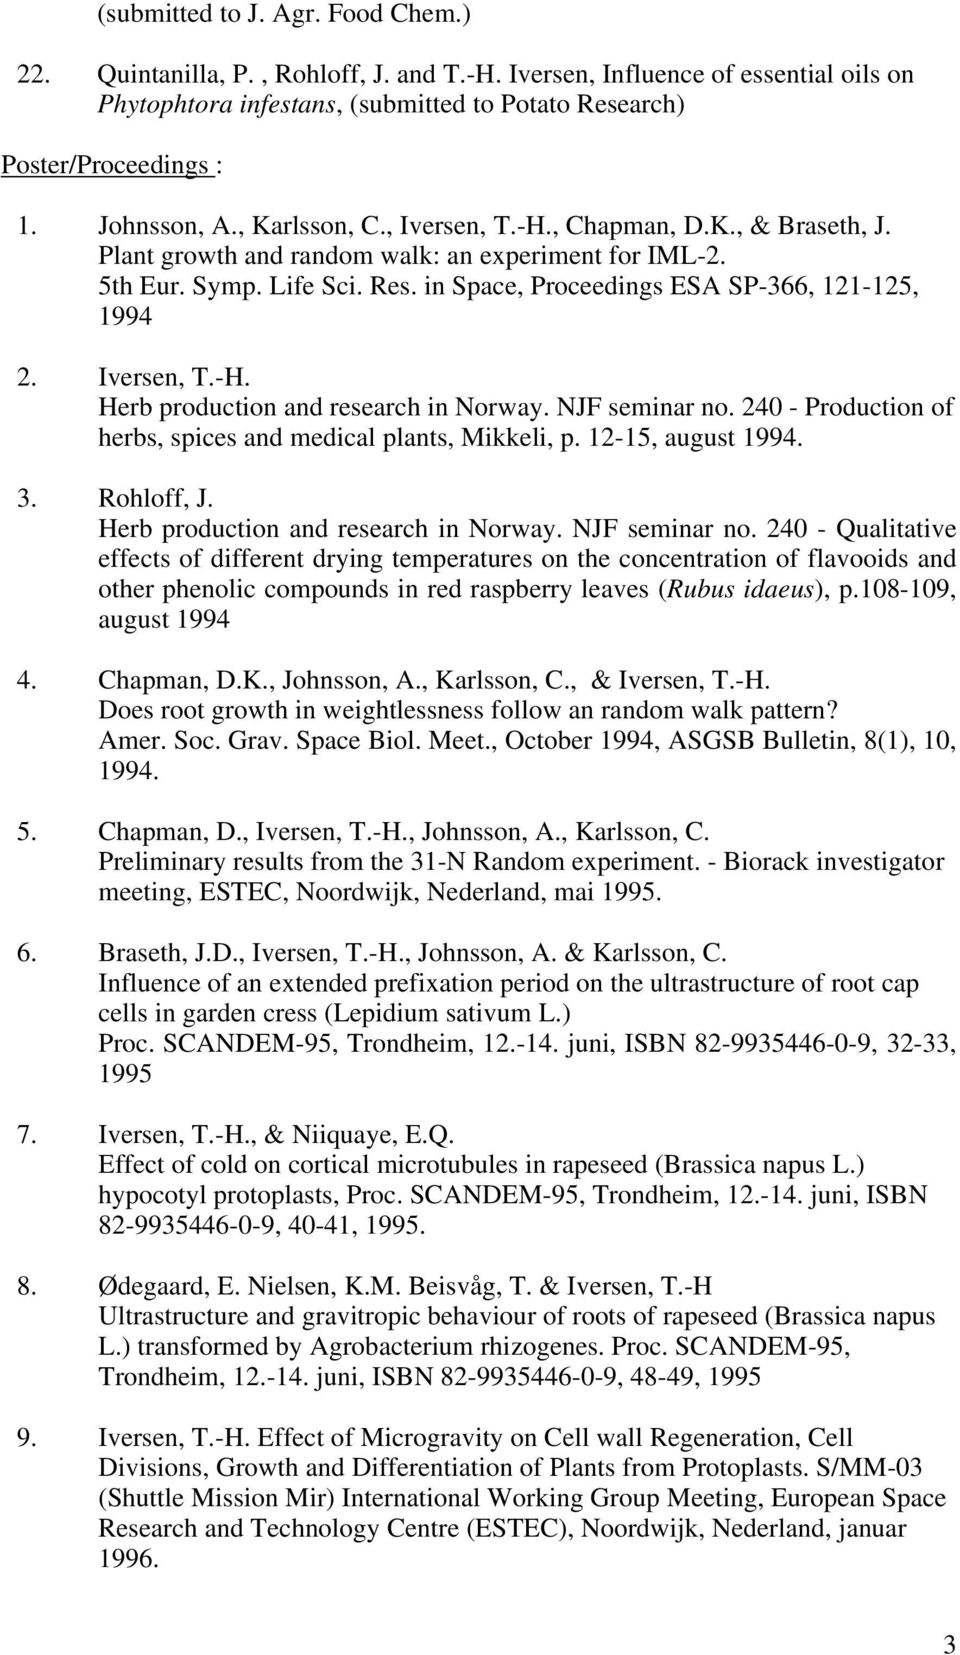 in Space, Proceedings ESA SP-366, 121-125, 1994 2. Iversen, T.-H. Herb production and research in Norway. NJF seminar no. 240 - Production of herbs, spices and medical plants, Mikkeli, p.